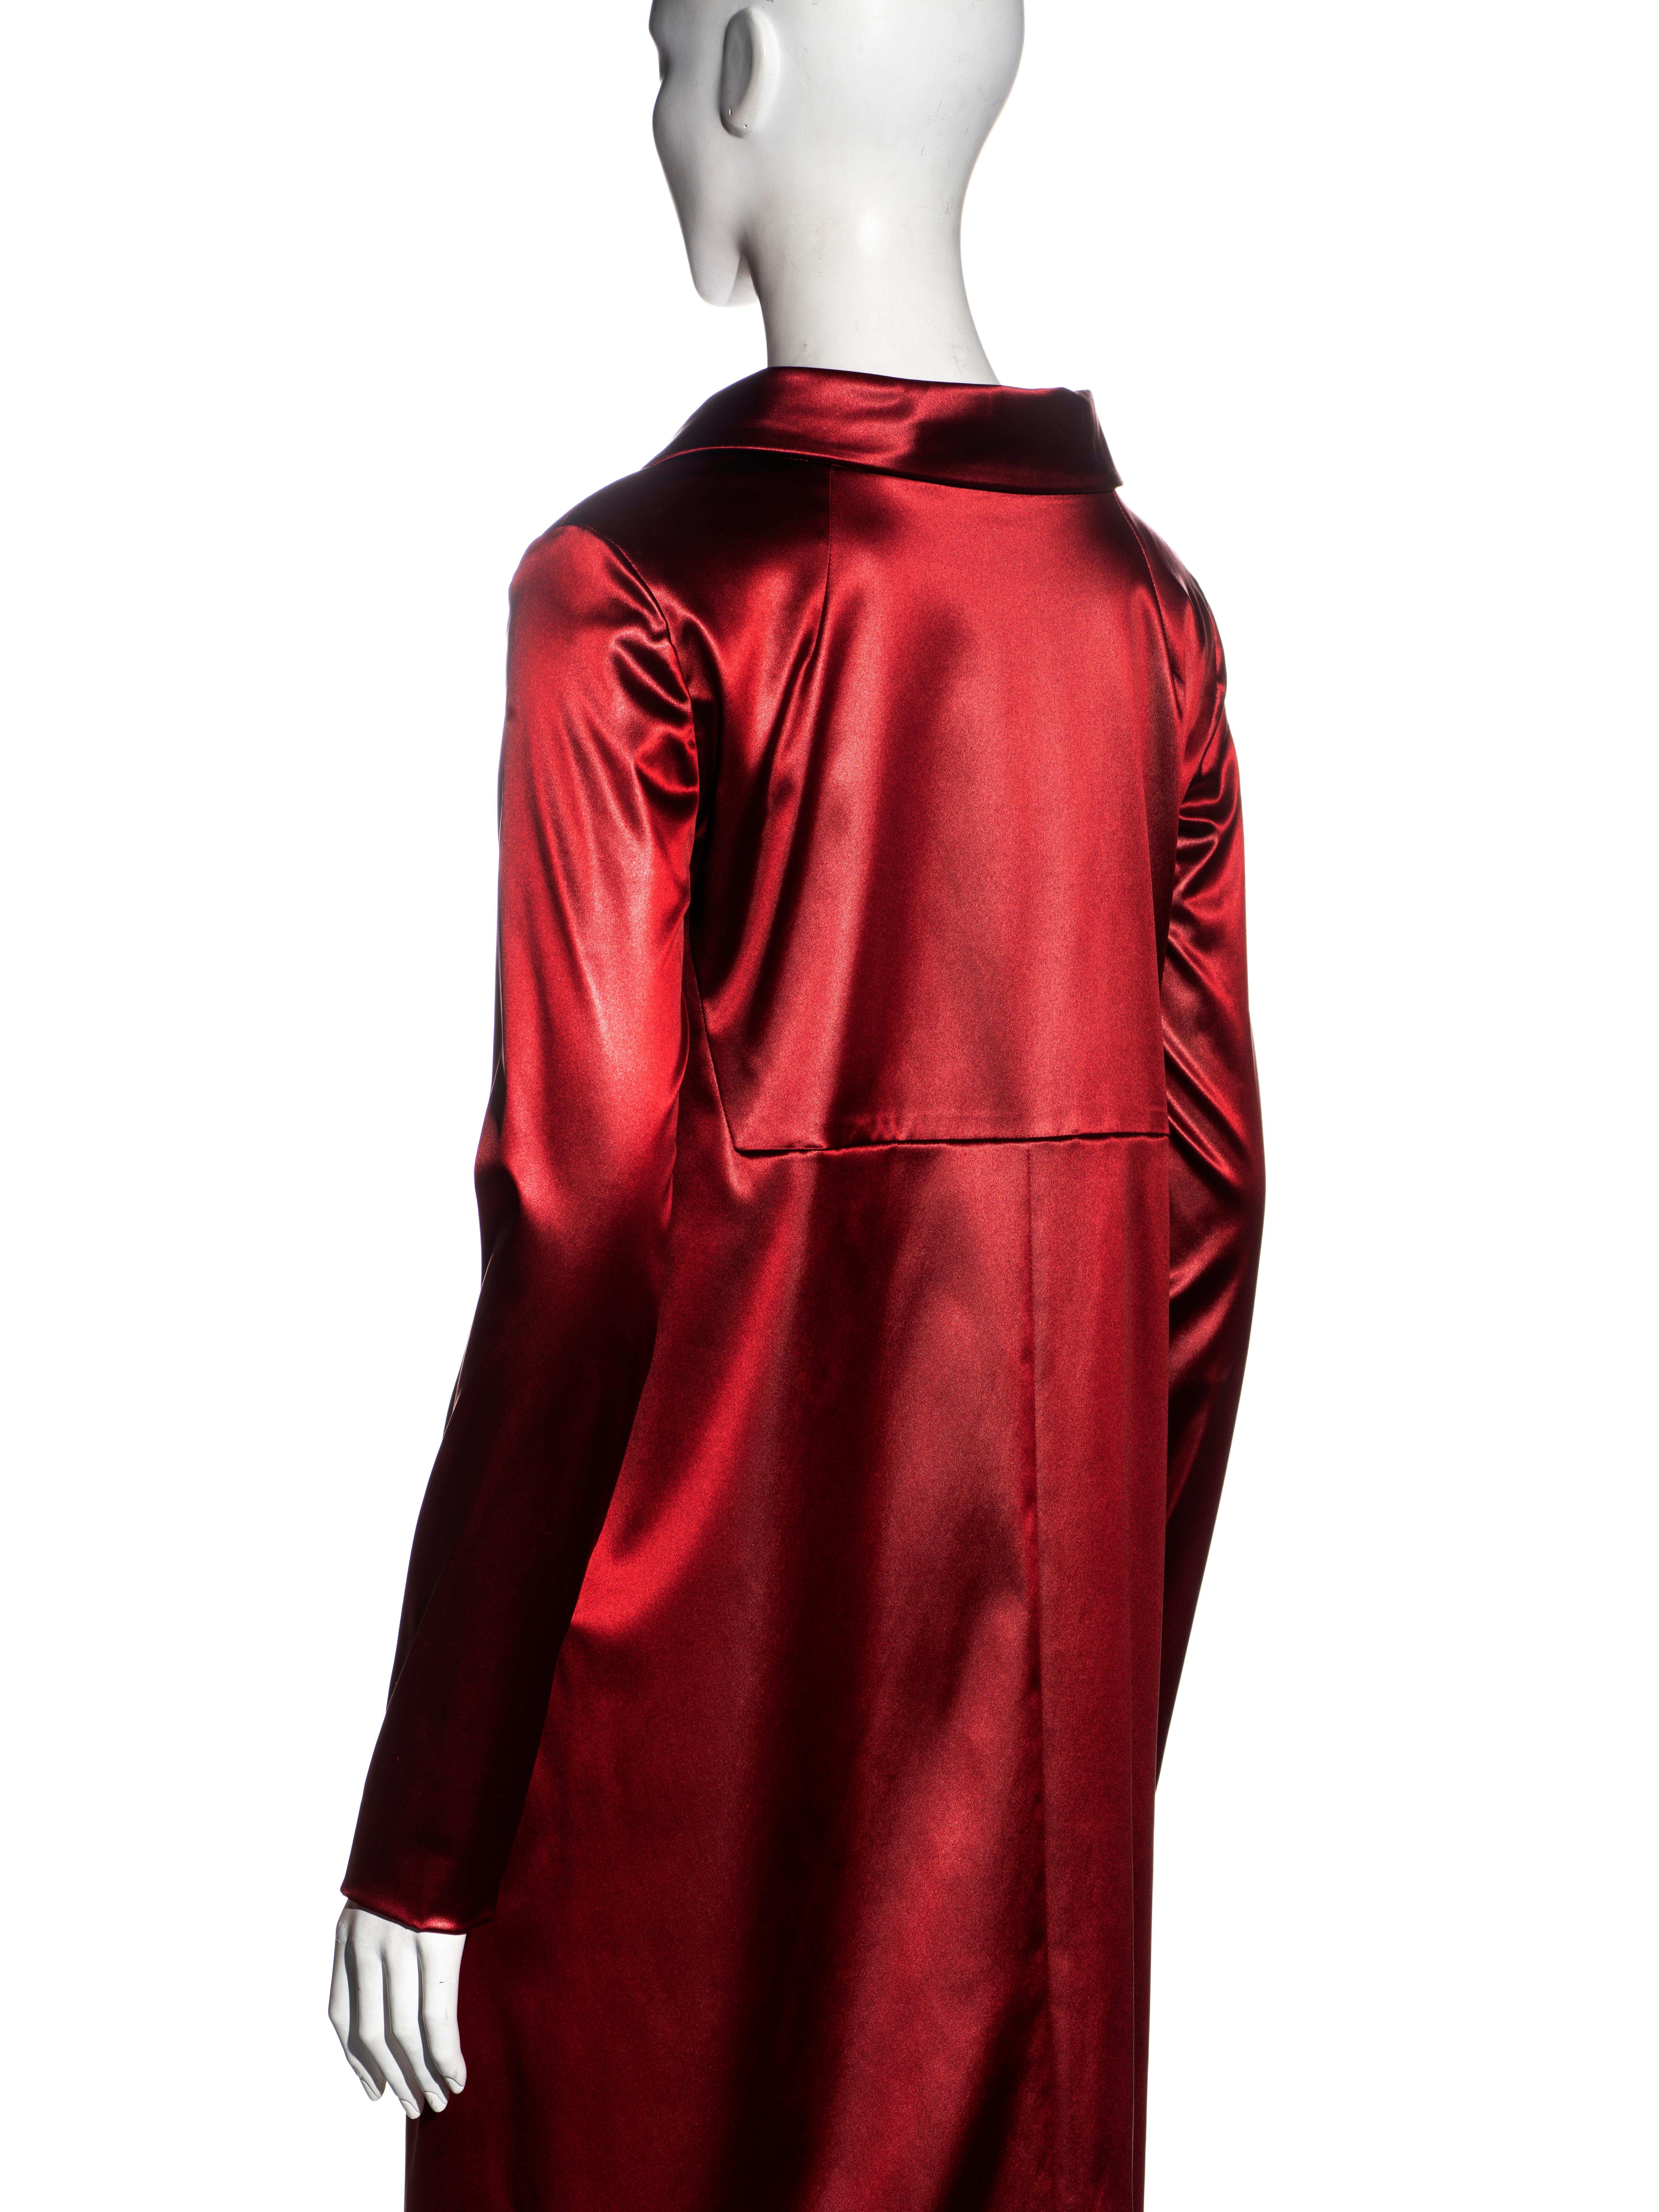 Dolce & Gabbana red stretch-satin coat and skirt set, ss 1999 For Sale 2